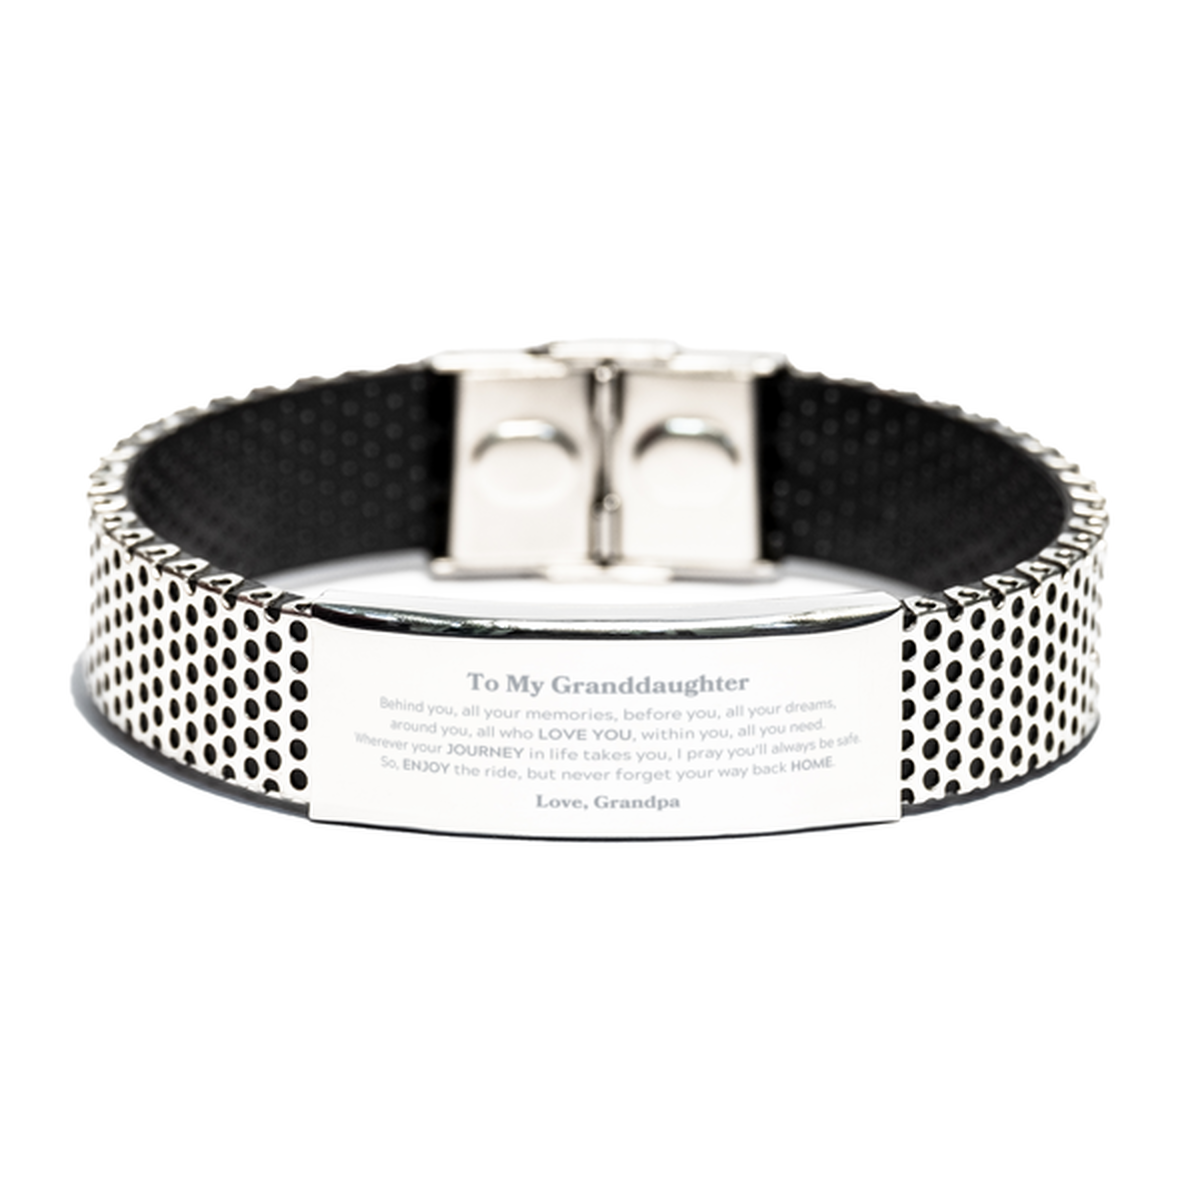 To My Granddaughter Graduation Gifts from Grandpa, Granddaughter Stainless Steel Bracelet Christmas Birthday Gifts for Granddaughter Behind you, all your memories, before you, all your dreams. Love, Grandpa